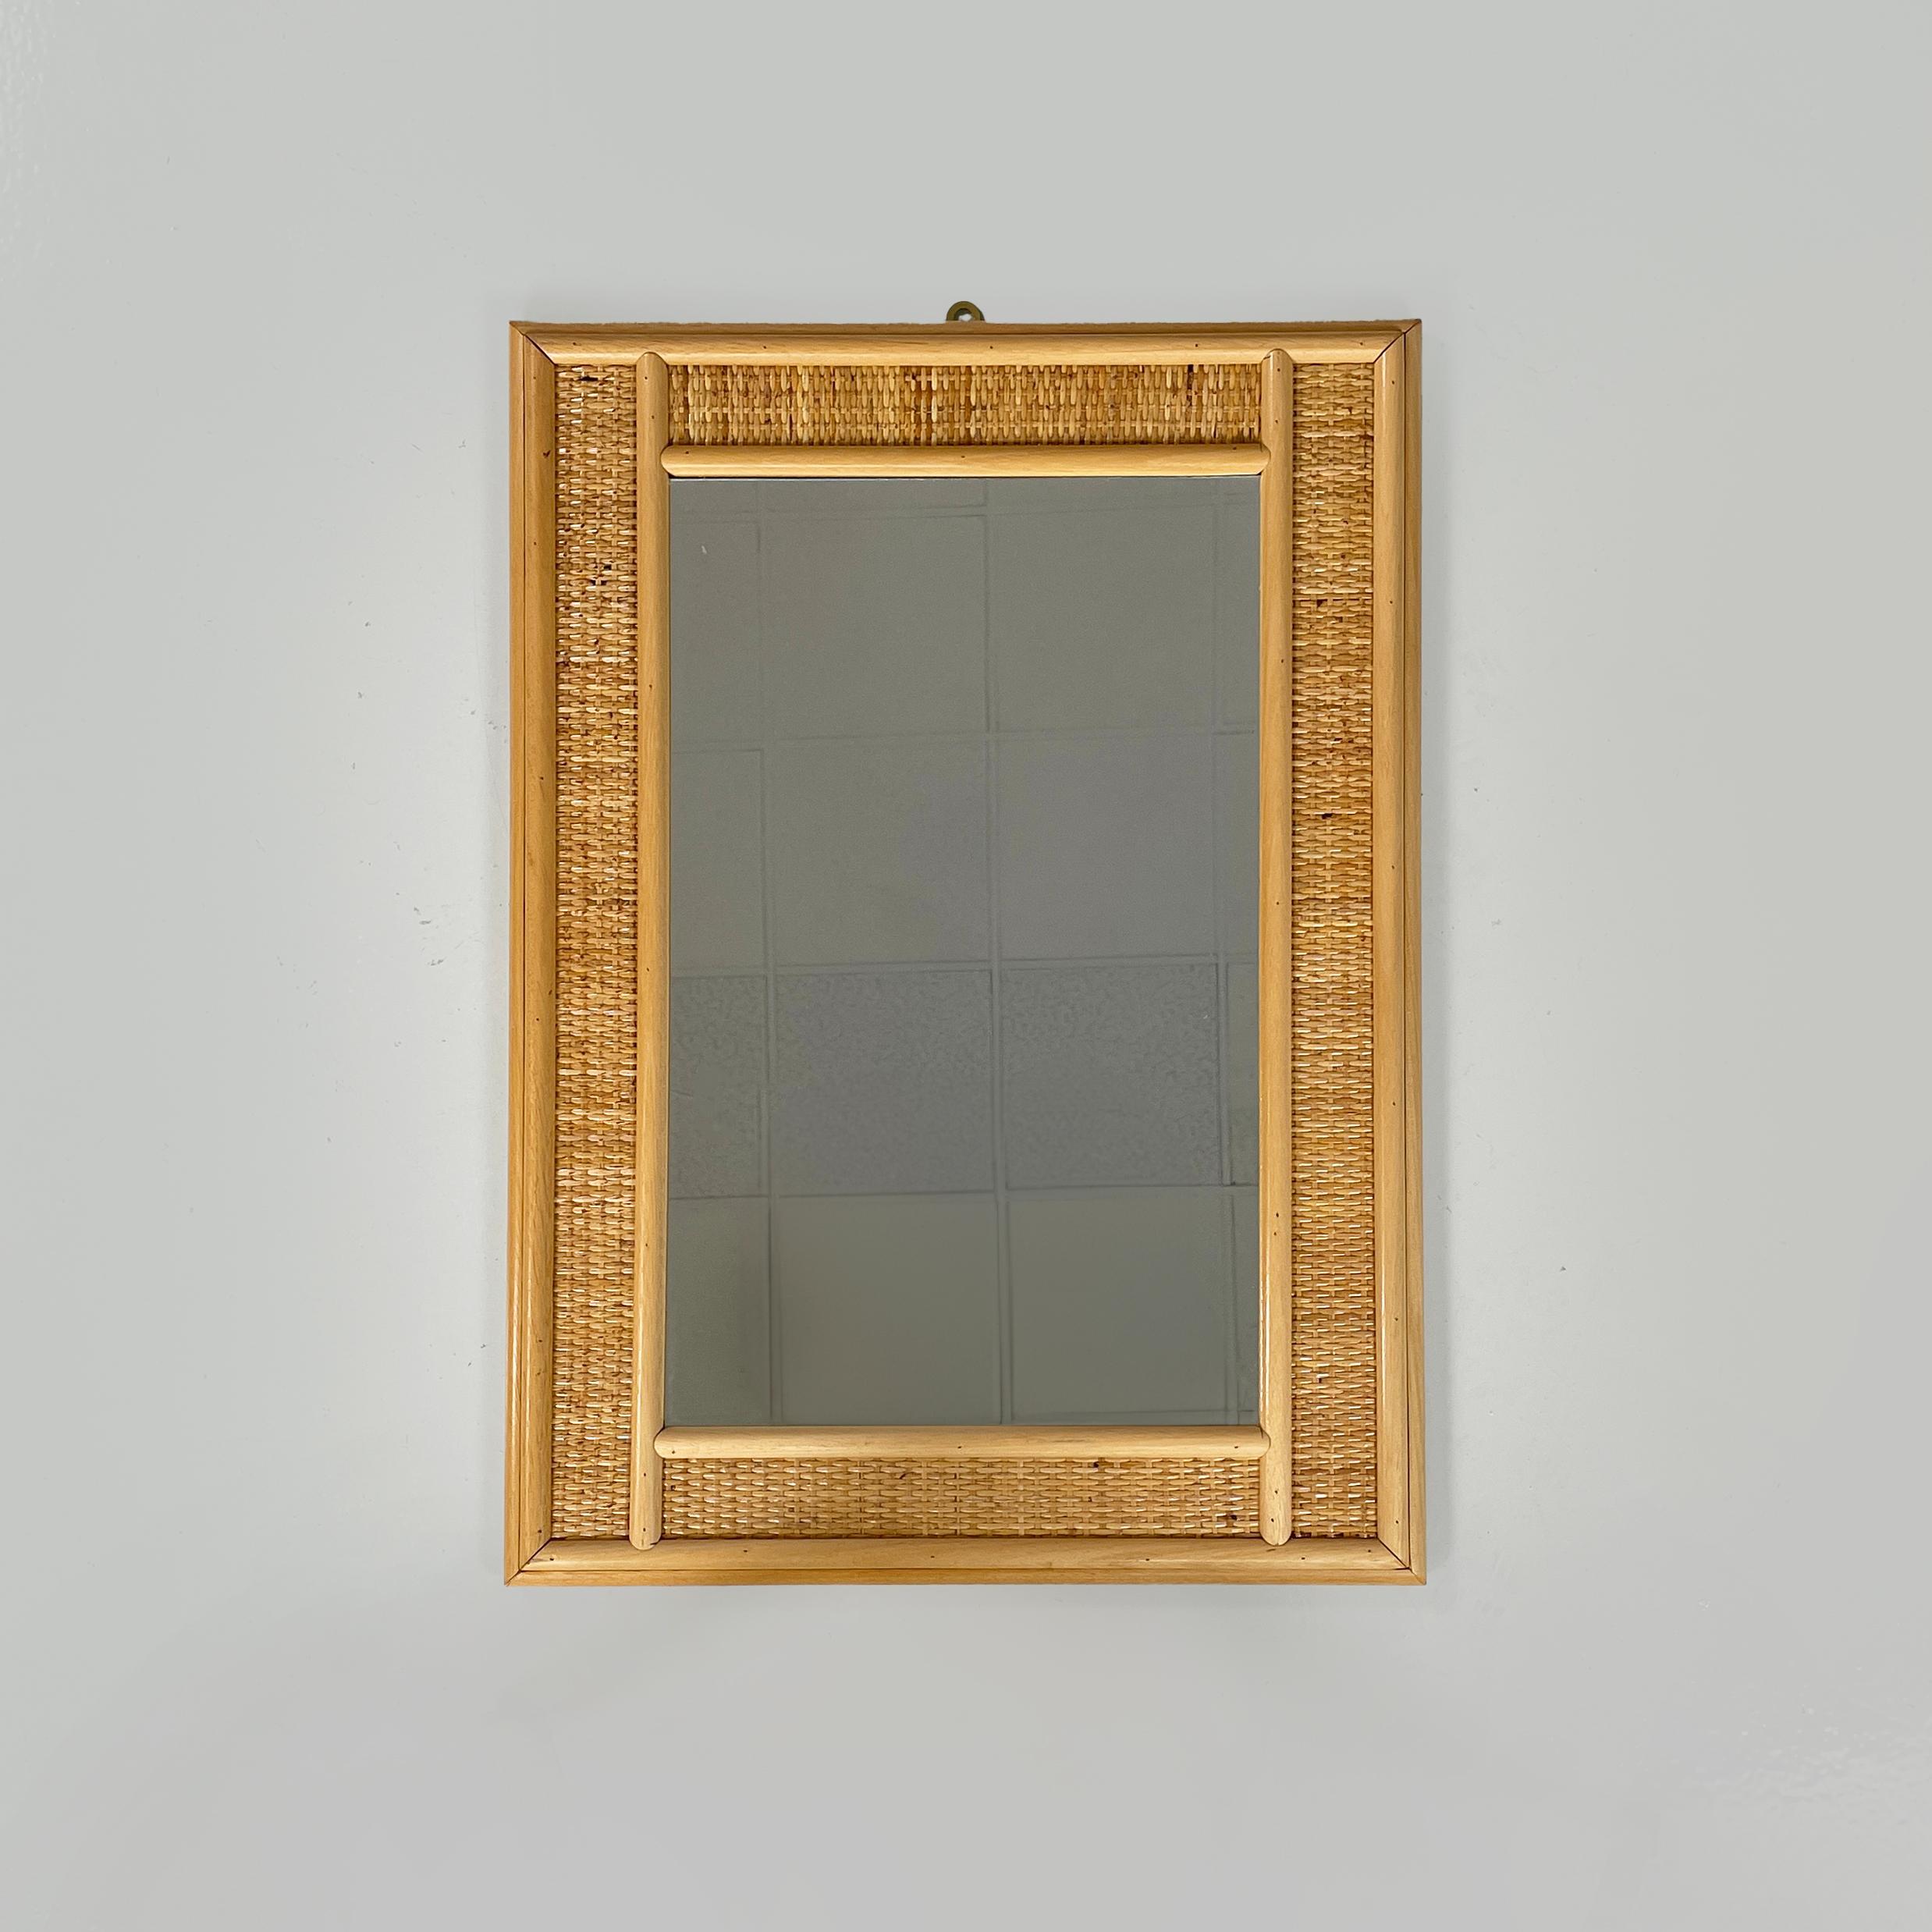 Italian mid-century modern Rectangular wall mirror in wood and rattan, 1960s
Rectangular wall mirror in wood and rattan. The frame has two wooden strips on each side and a strip of woven rattan in the middle.
1960s.
Good condition, light signs of